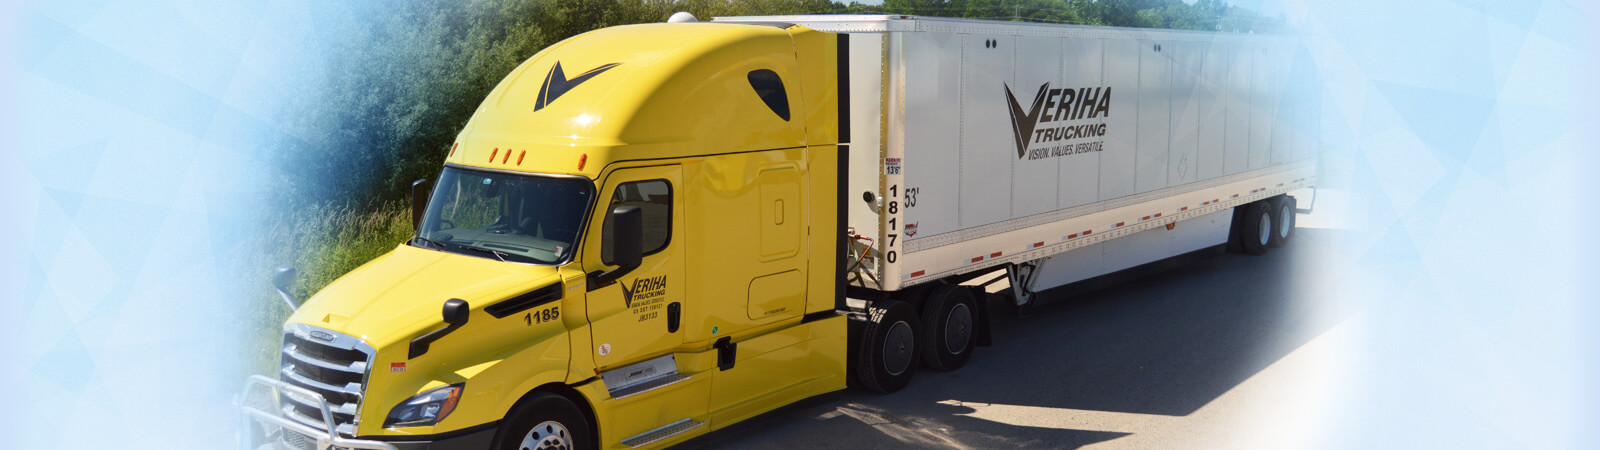 Veriha Trucking - Truckload | Compressed Natural Gas | Dedicated | Freight Management